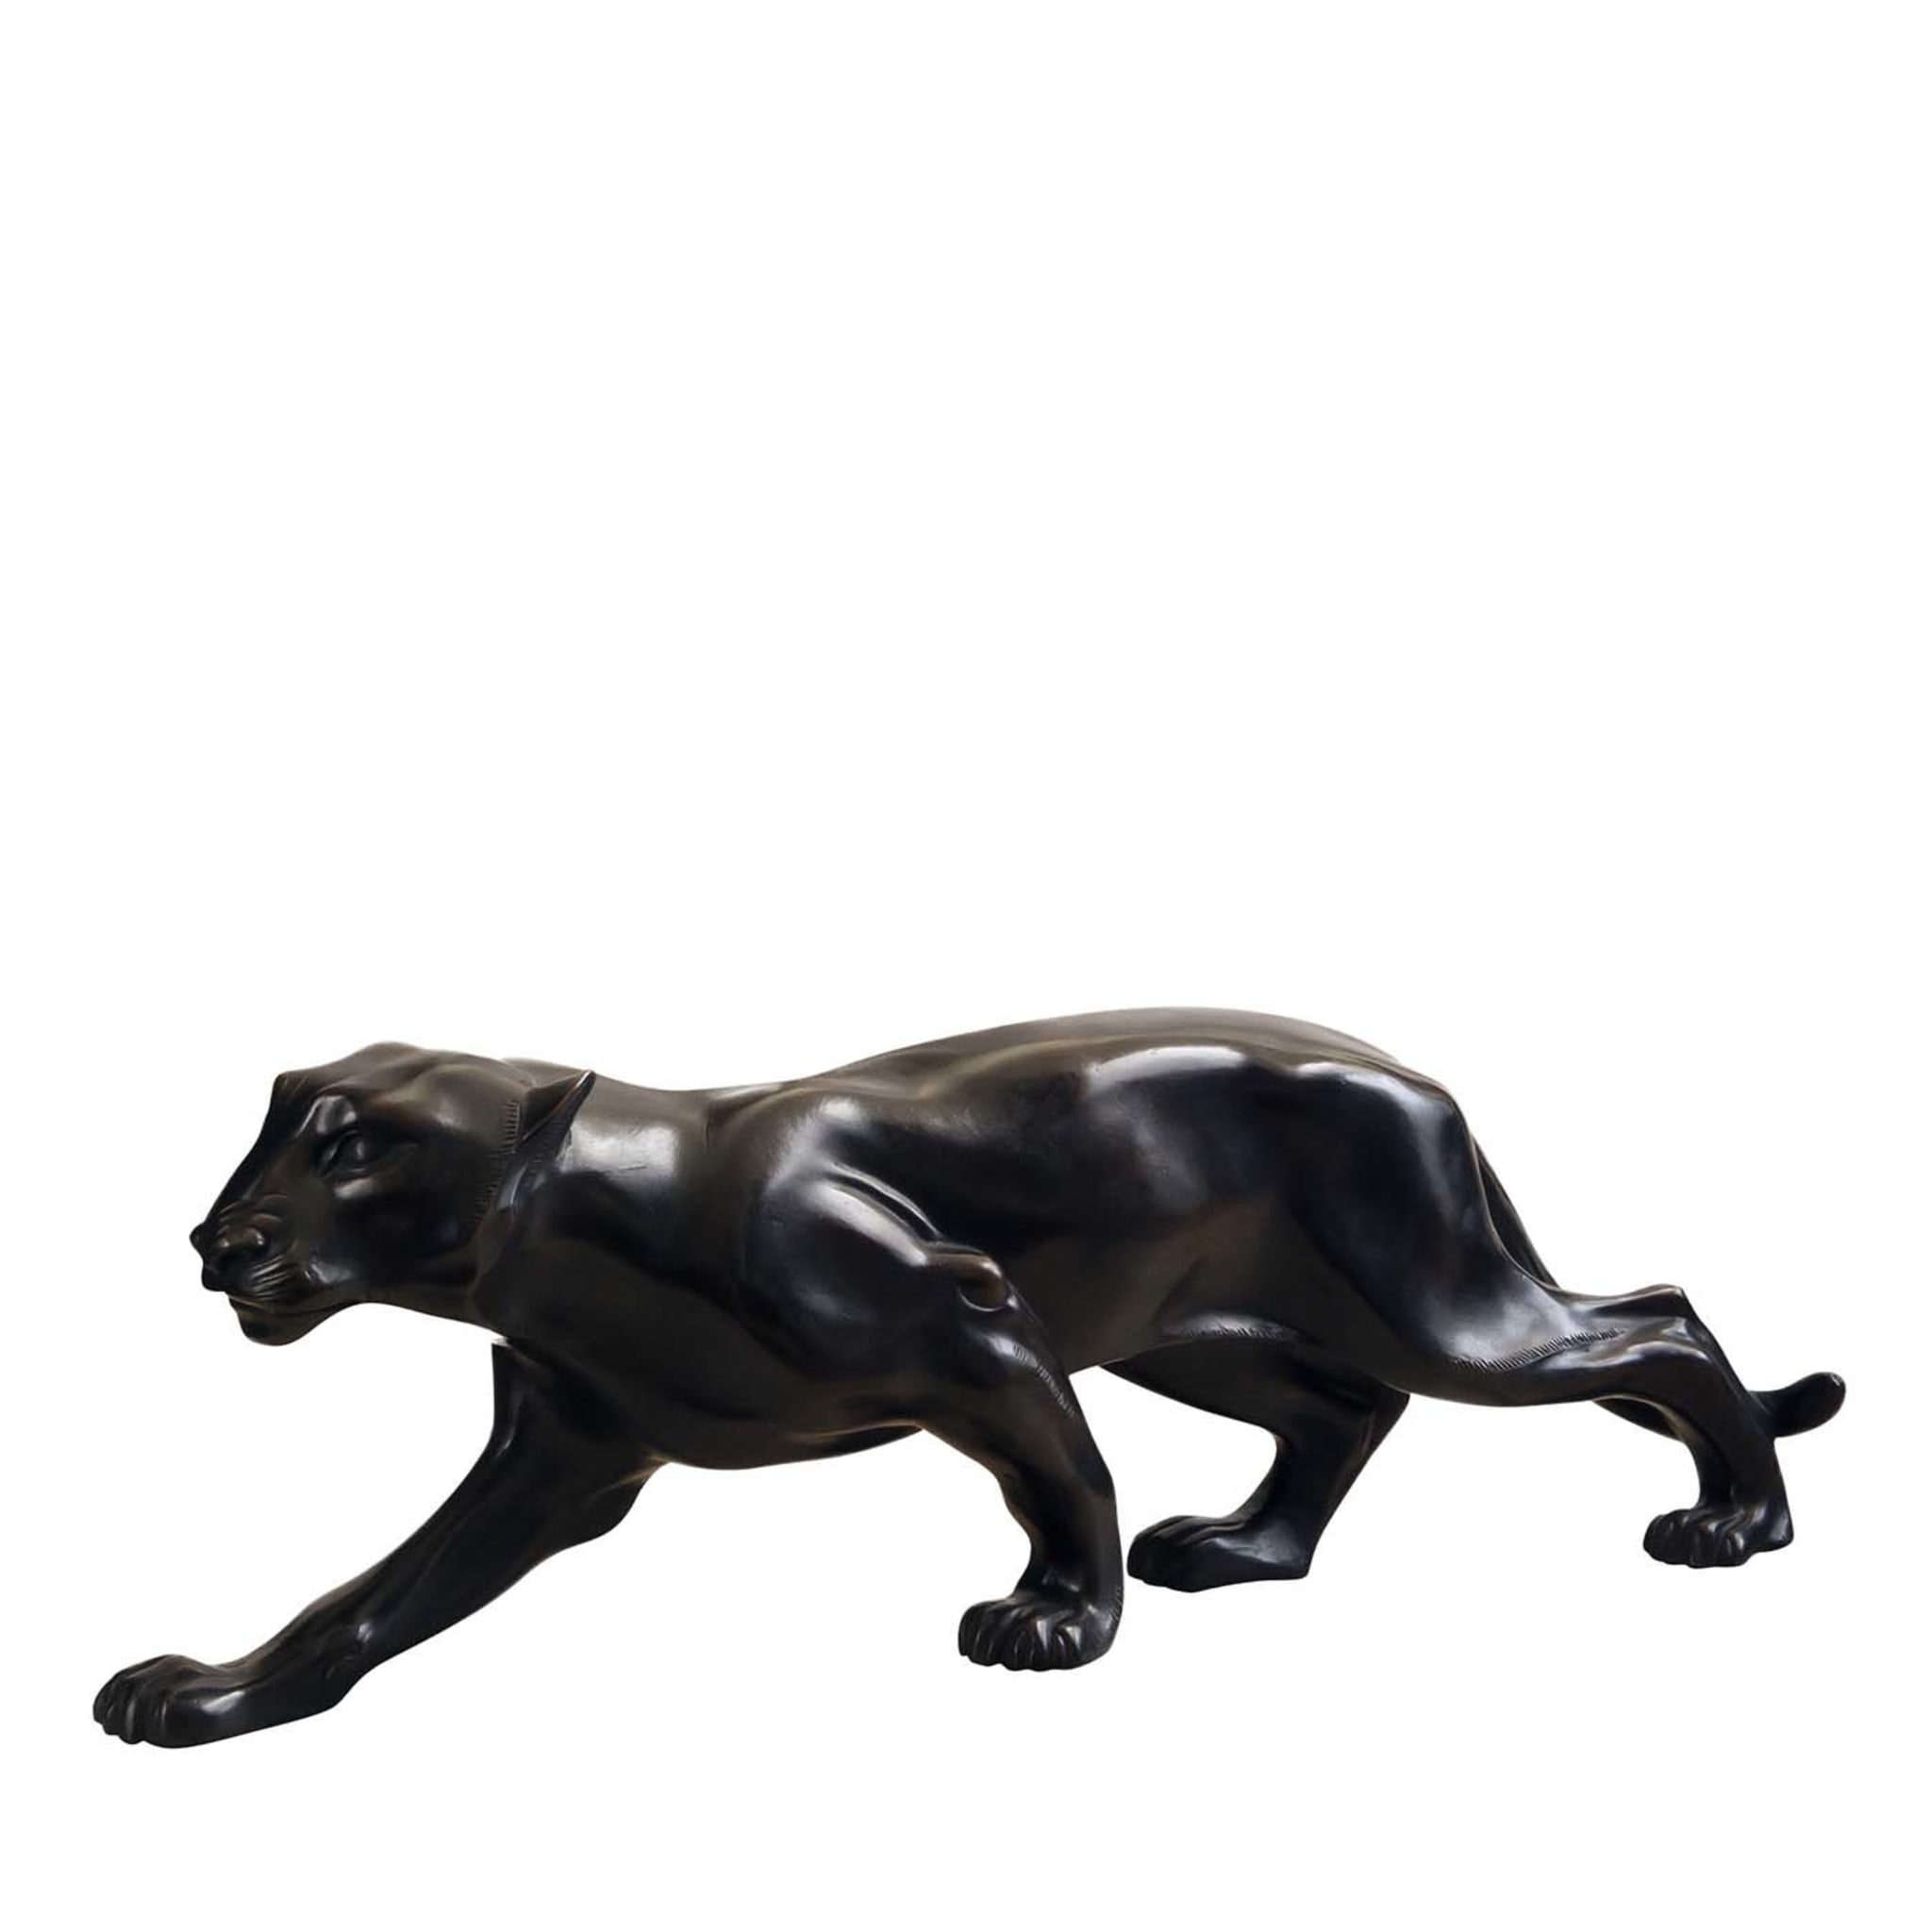 Black Panther Statuette - Main view